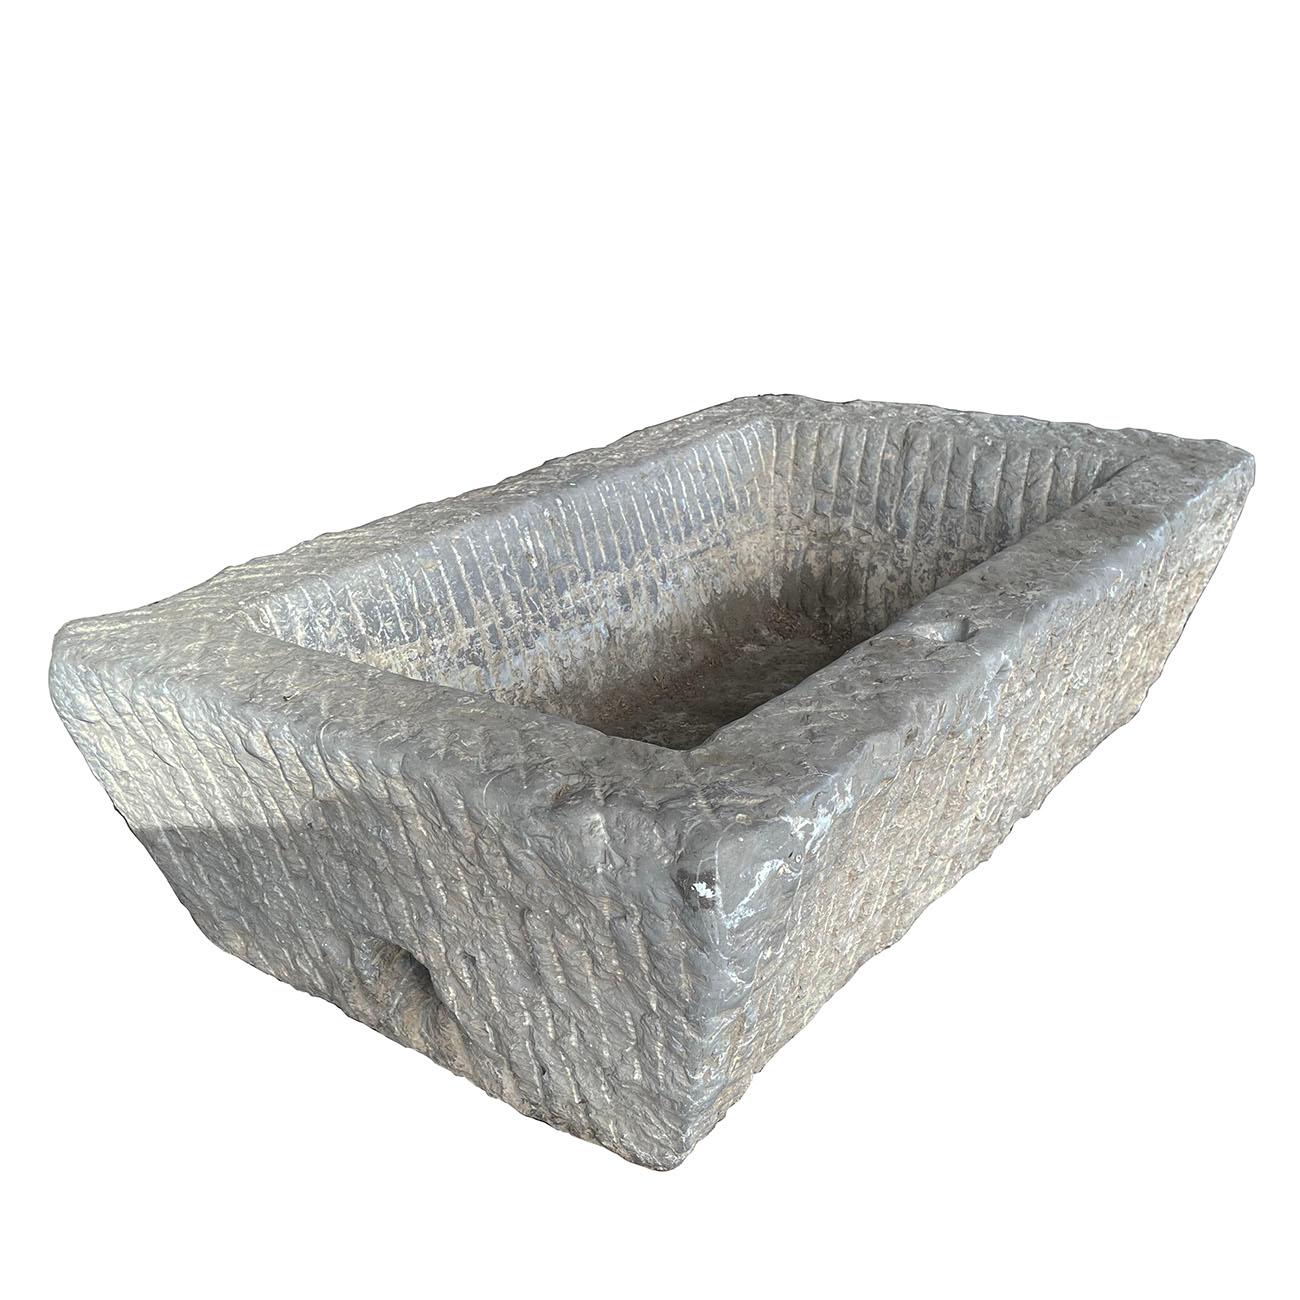 Carved 19th Century Antique Chinese Hand Chiseled Stone Trough, Planter For Sale